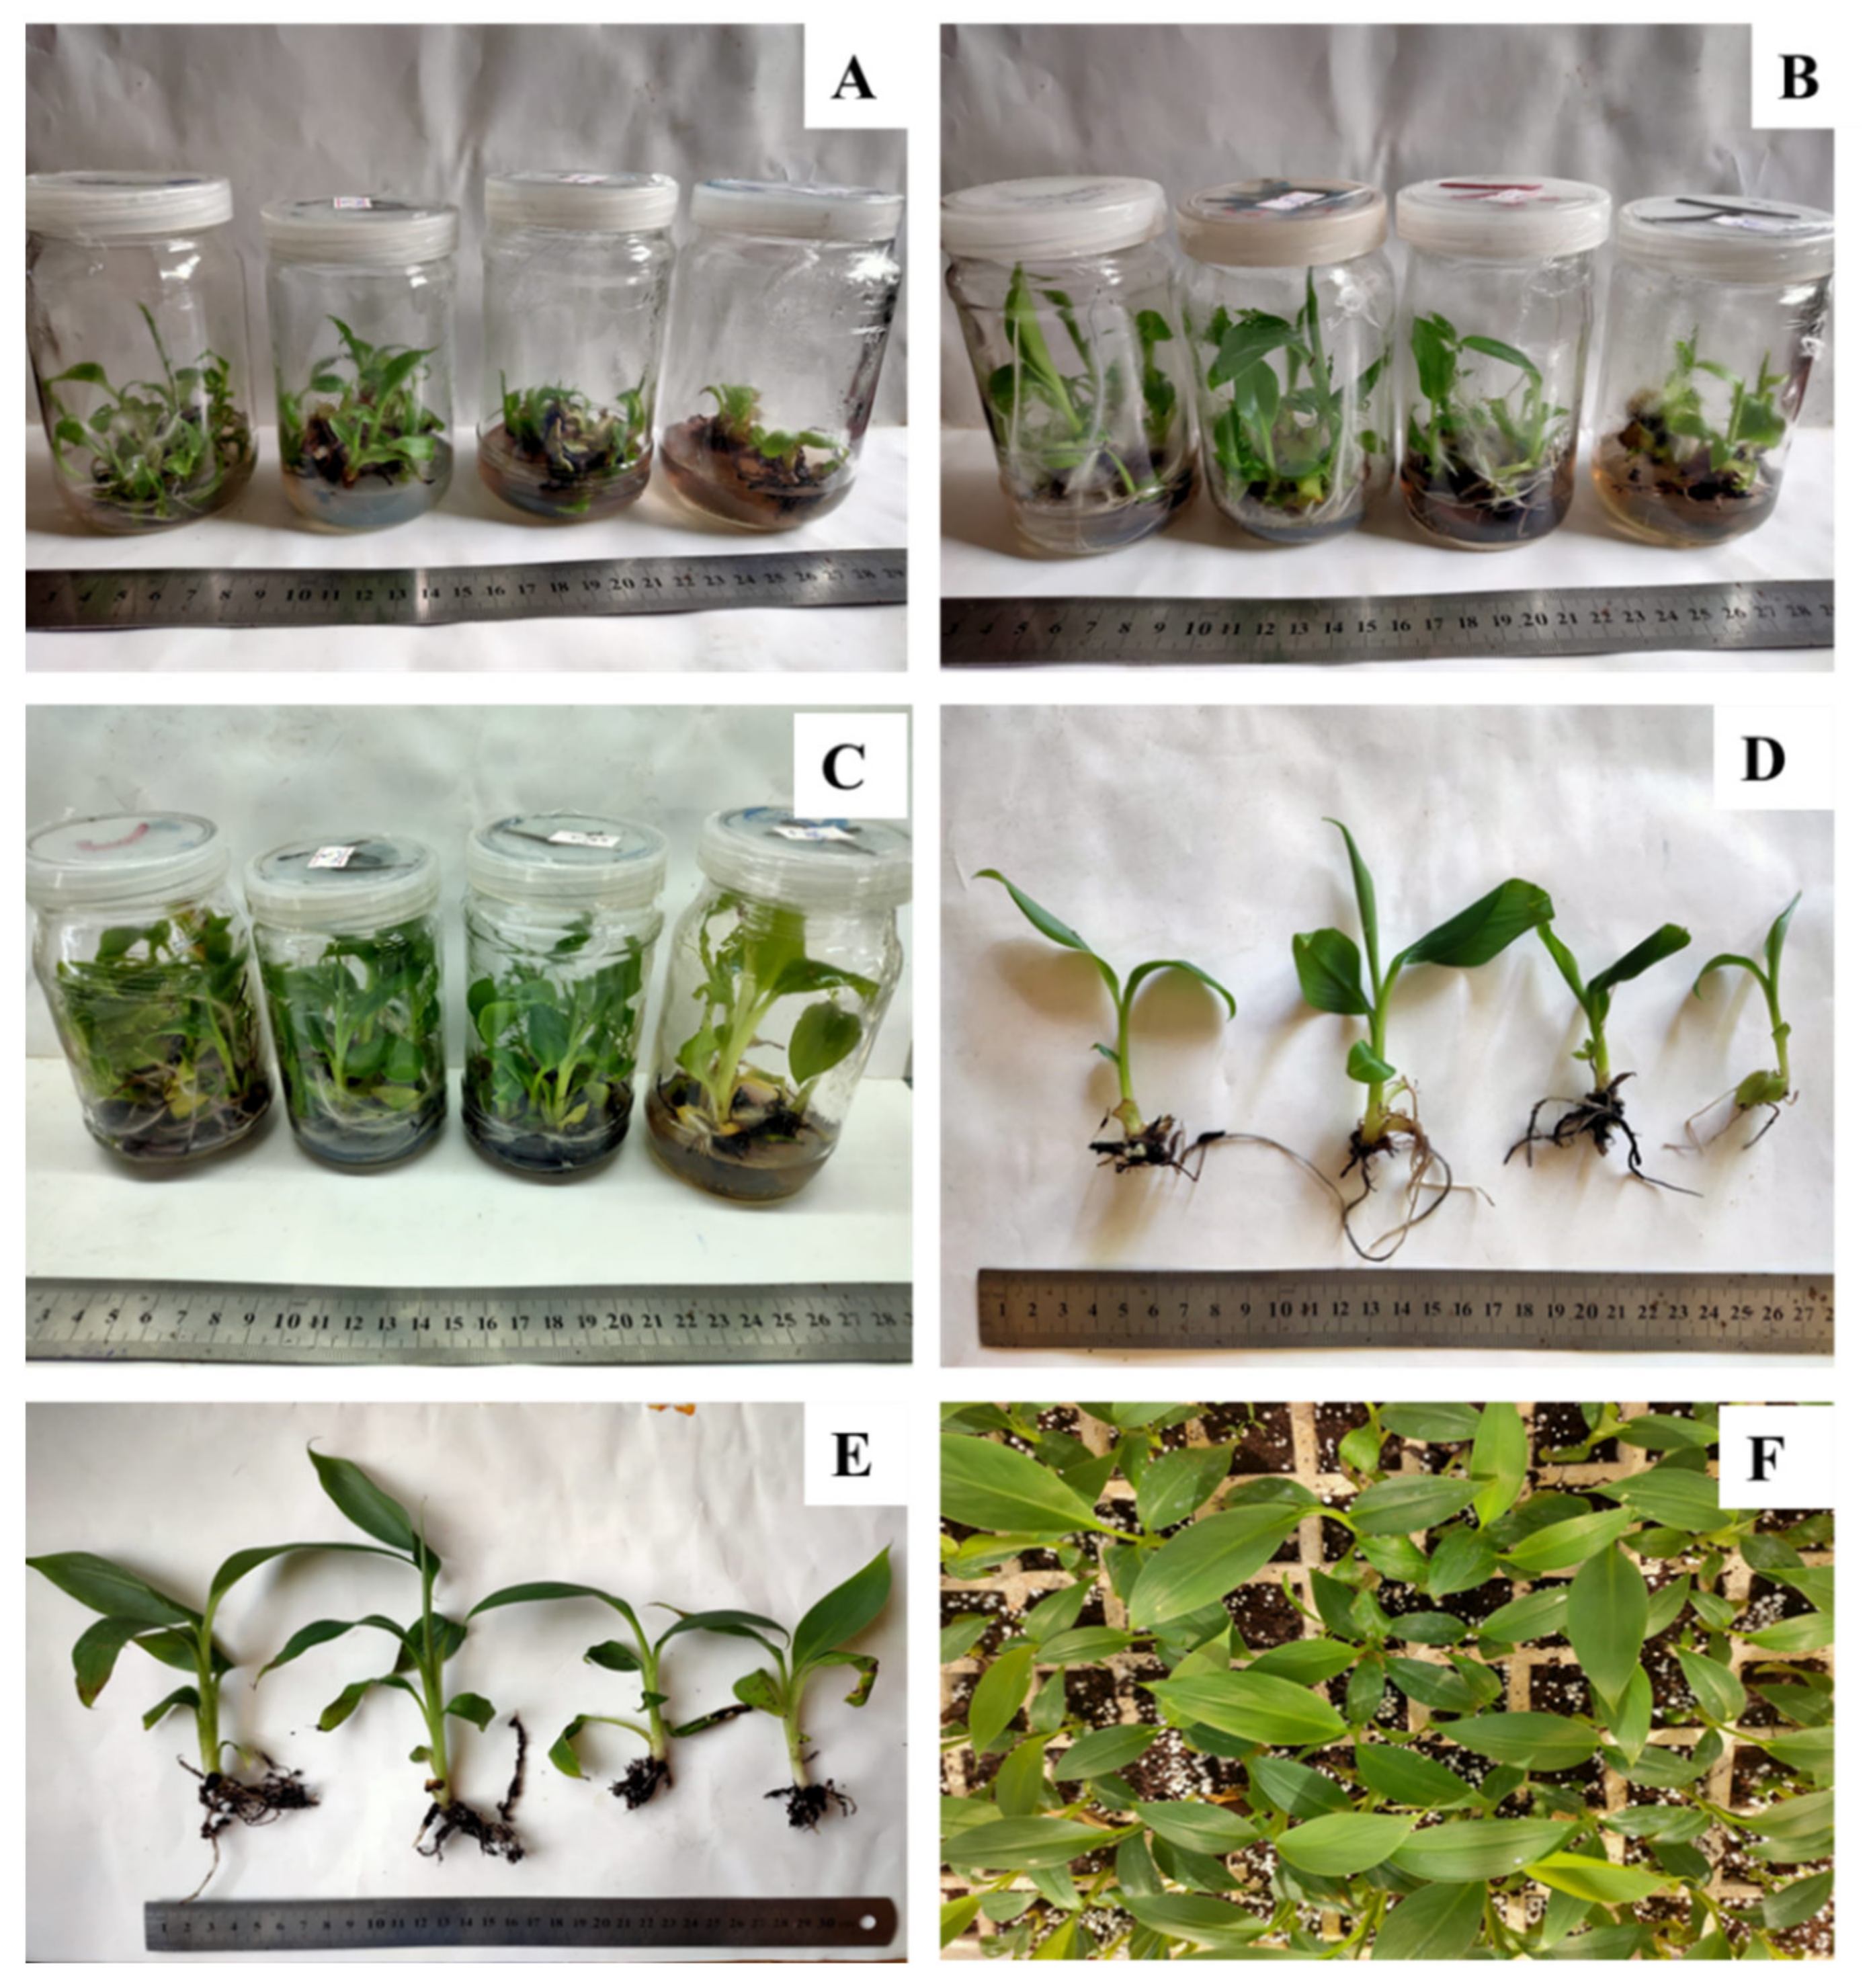 Plants | Free Full-Text | In Vitro Propagation and Acclimatization of  Banana Plants: Antioxidant Enzymes, Chemical Assessments and Genetic  Stability of Regenerates as a Response to Copper Sulphate | HTML